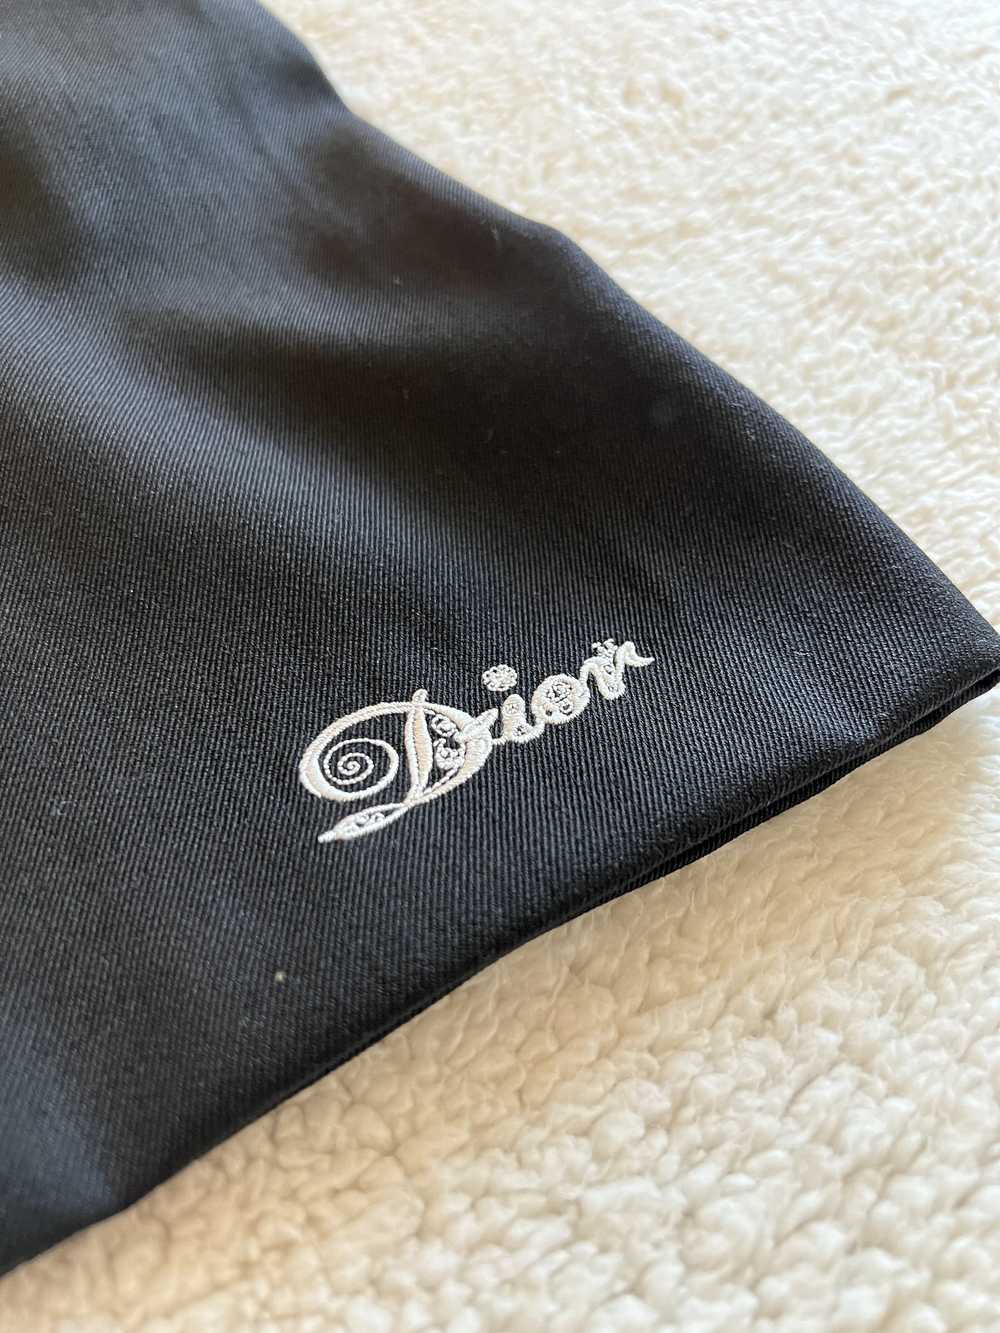 Dior Dior Tailored Chino Shorts with Embroidery - image 3